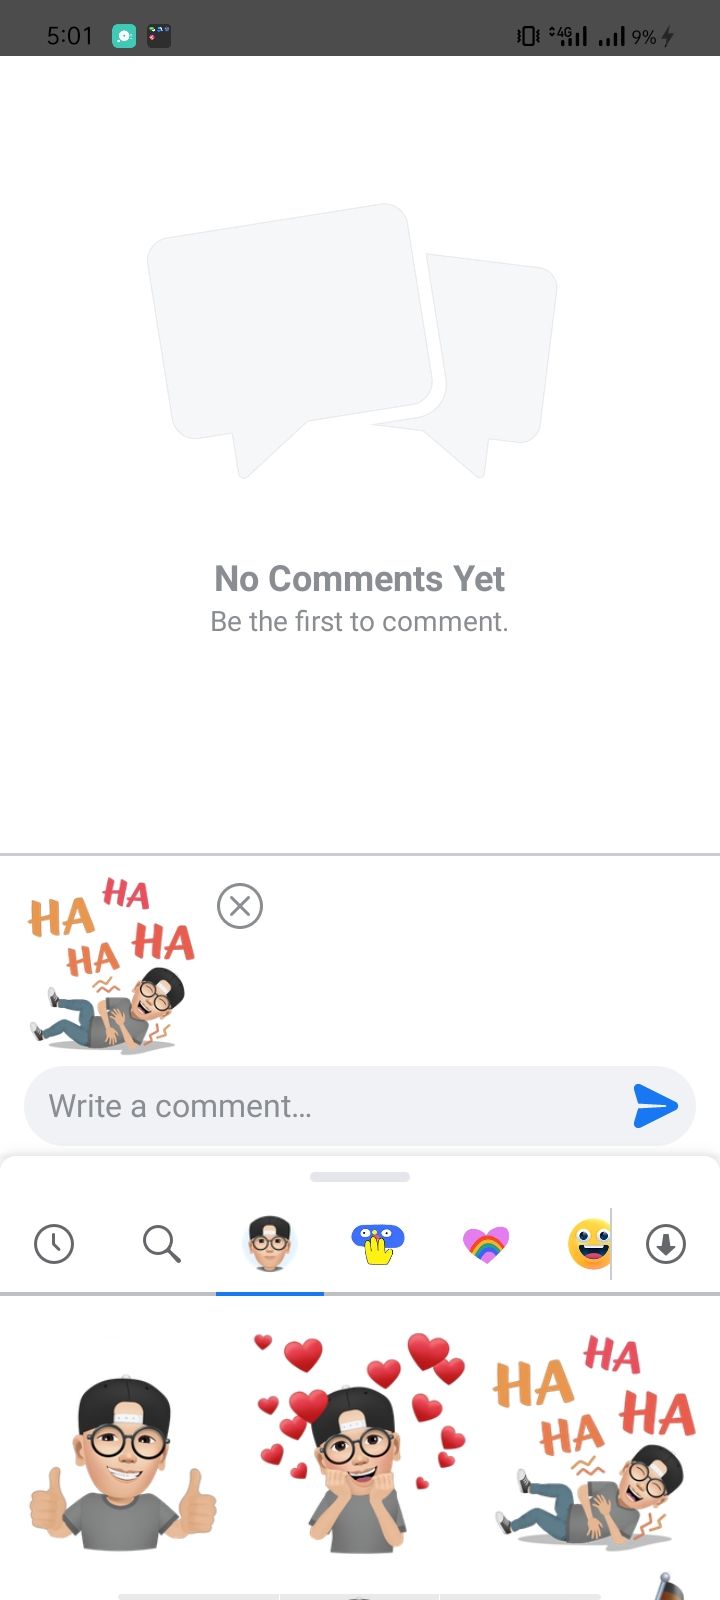 Personalized Sticker Selected To Use In Comments On Facebook